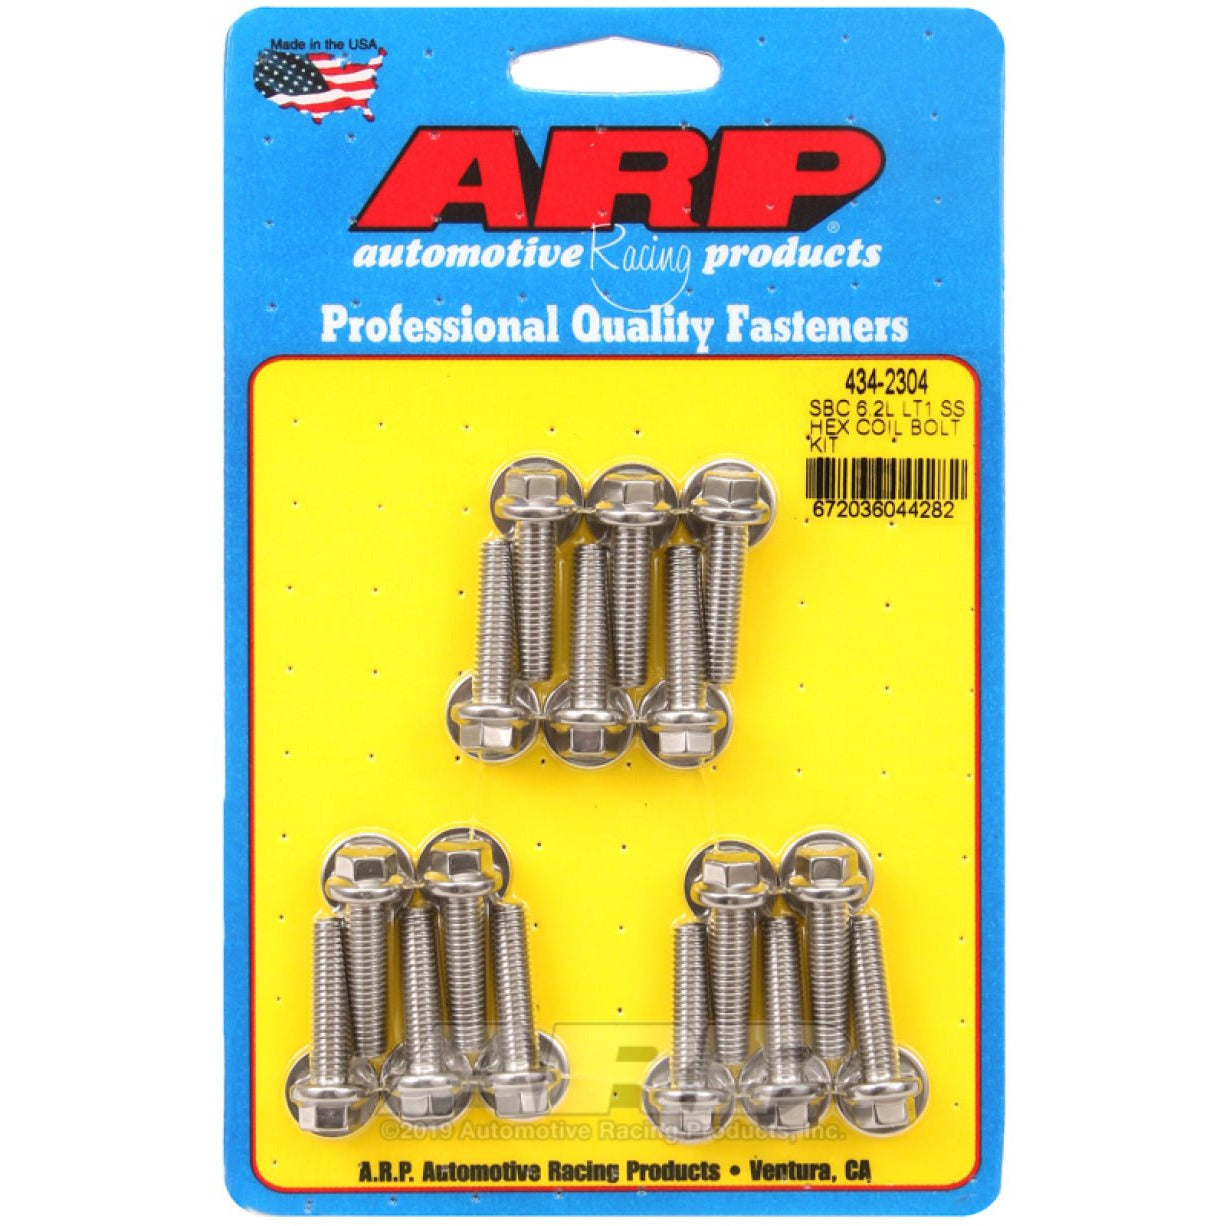 ARP Chevy LT1 6.2L Ignition Coil Hex Stainless Steel Bolt Kit ARP Hardware Kits - Other